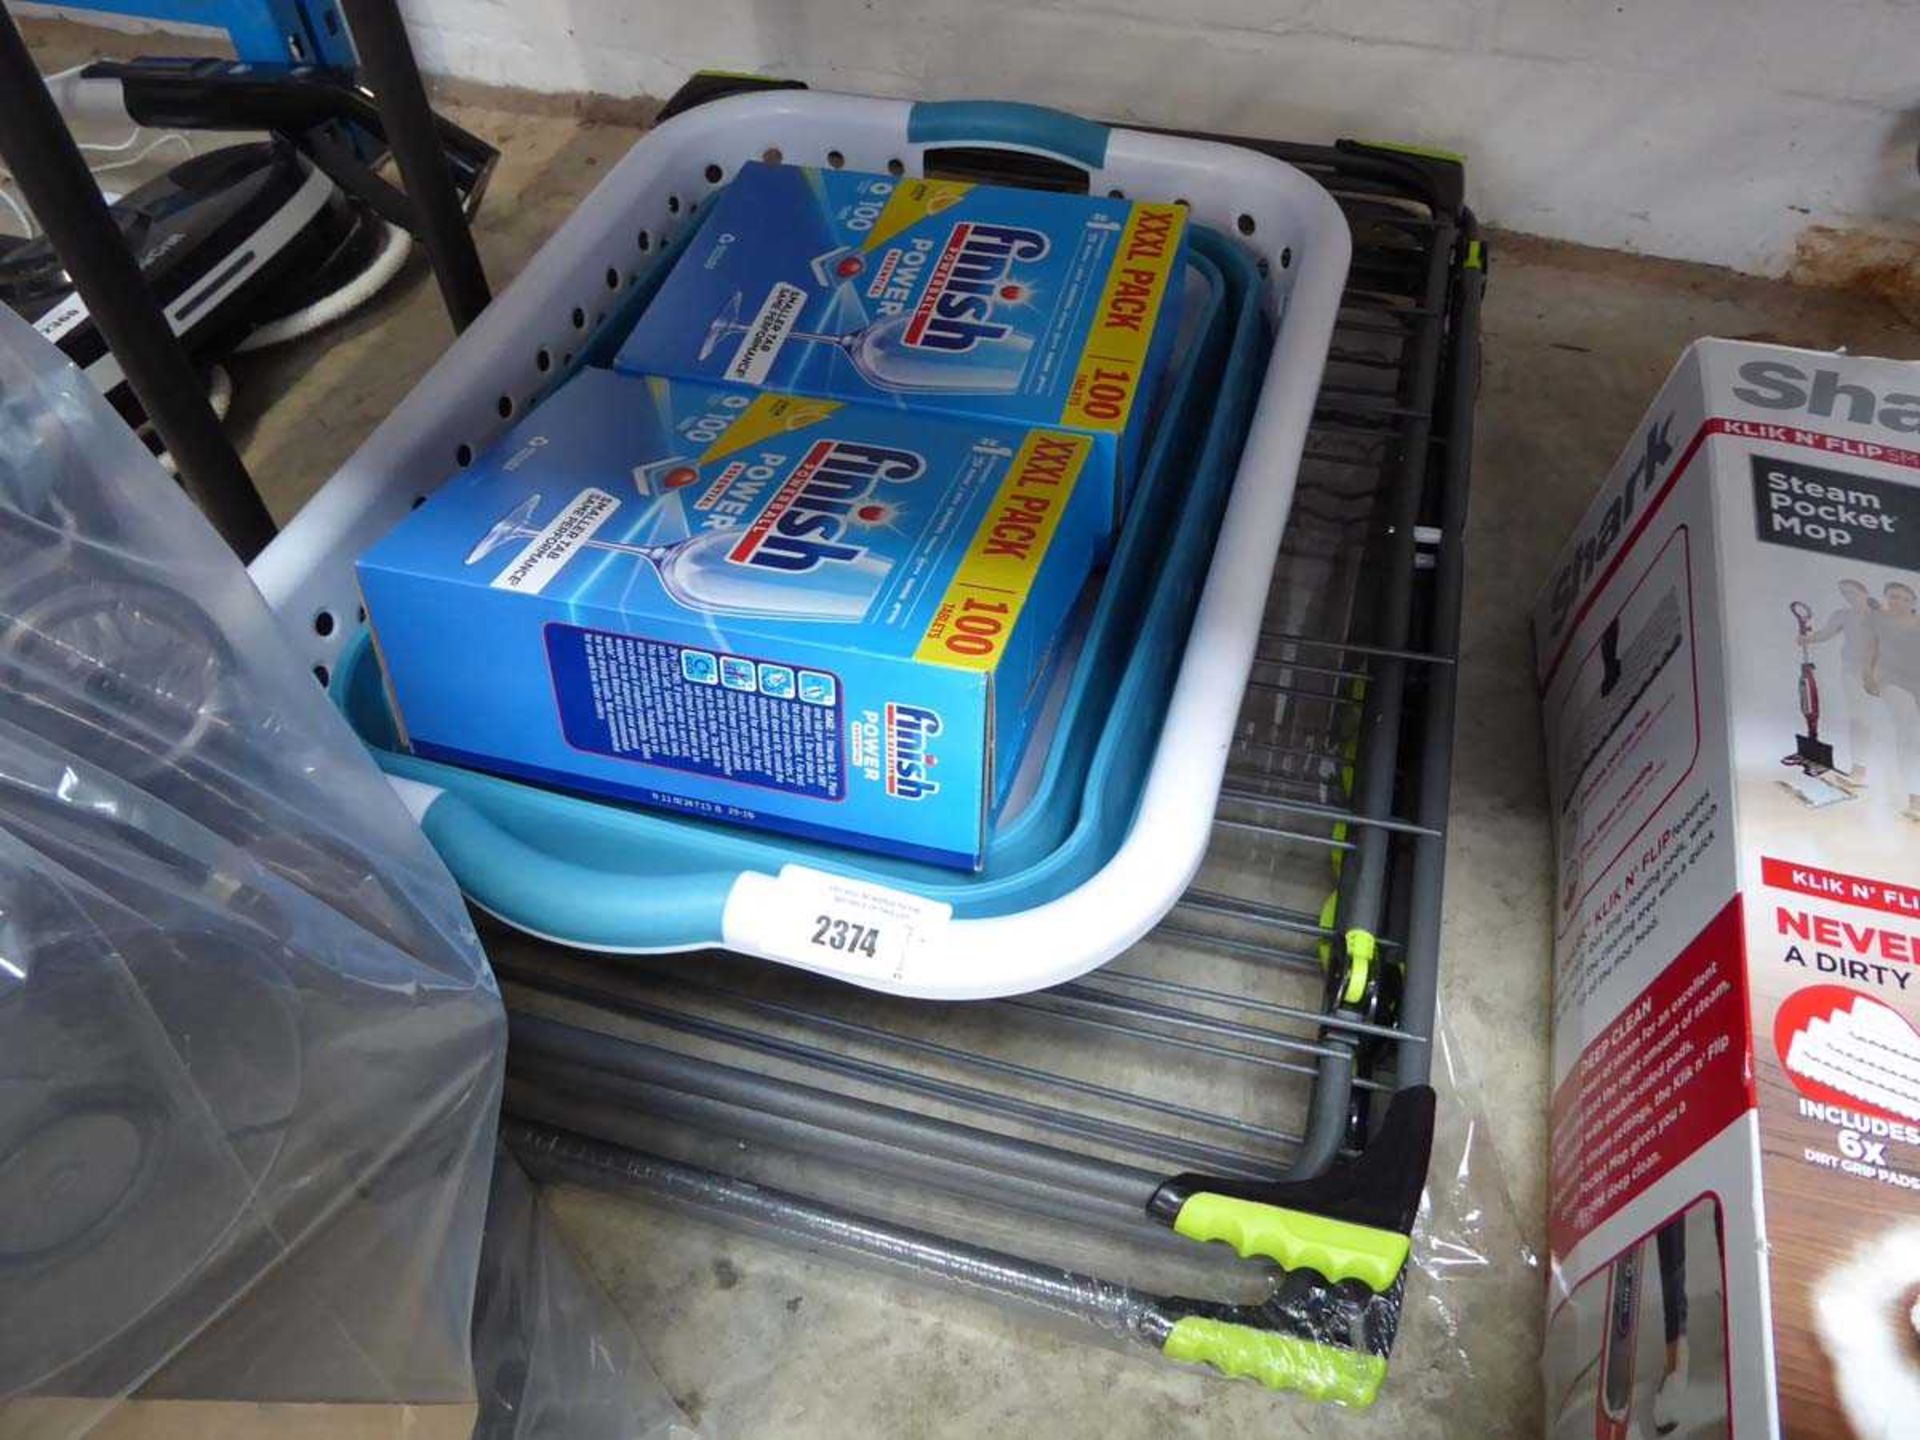 +VAT 2 collapsible laundry airers with expanding laundry basket and 2 tubs of Finish dish washer